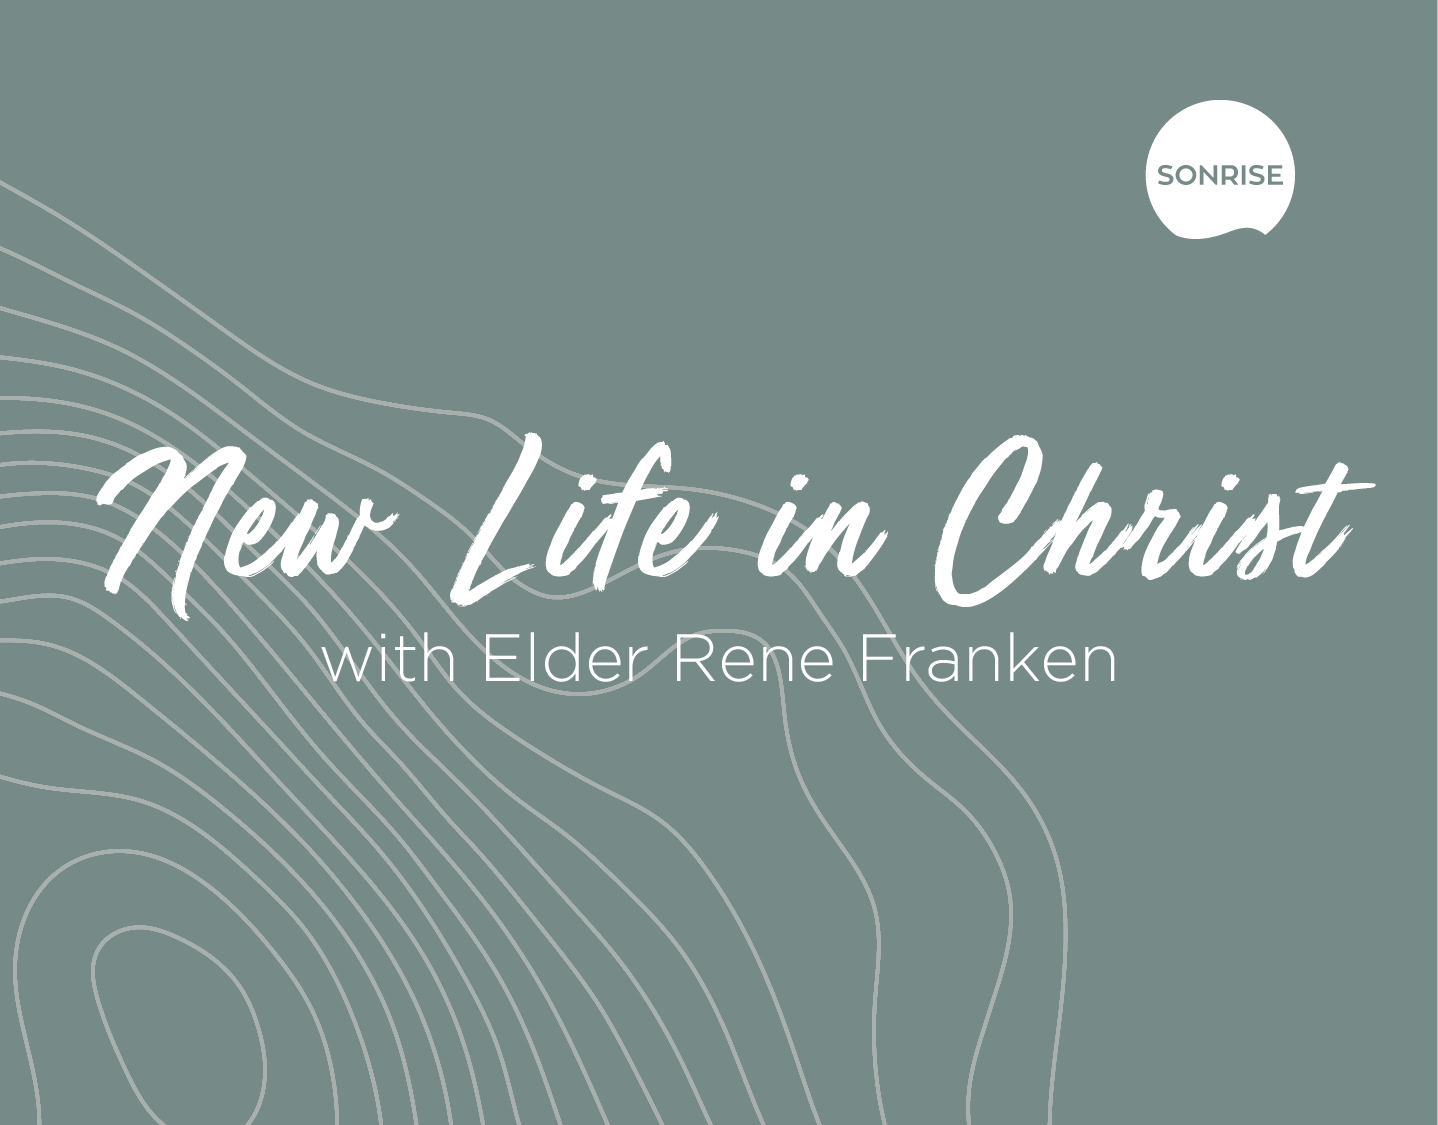 New Life In Christ banner